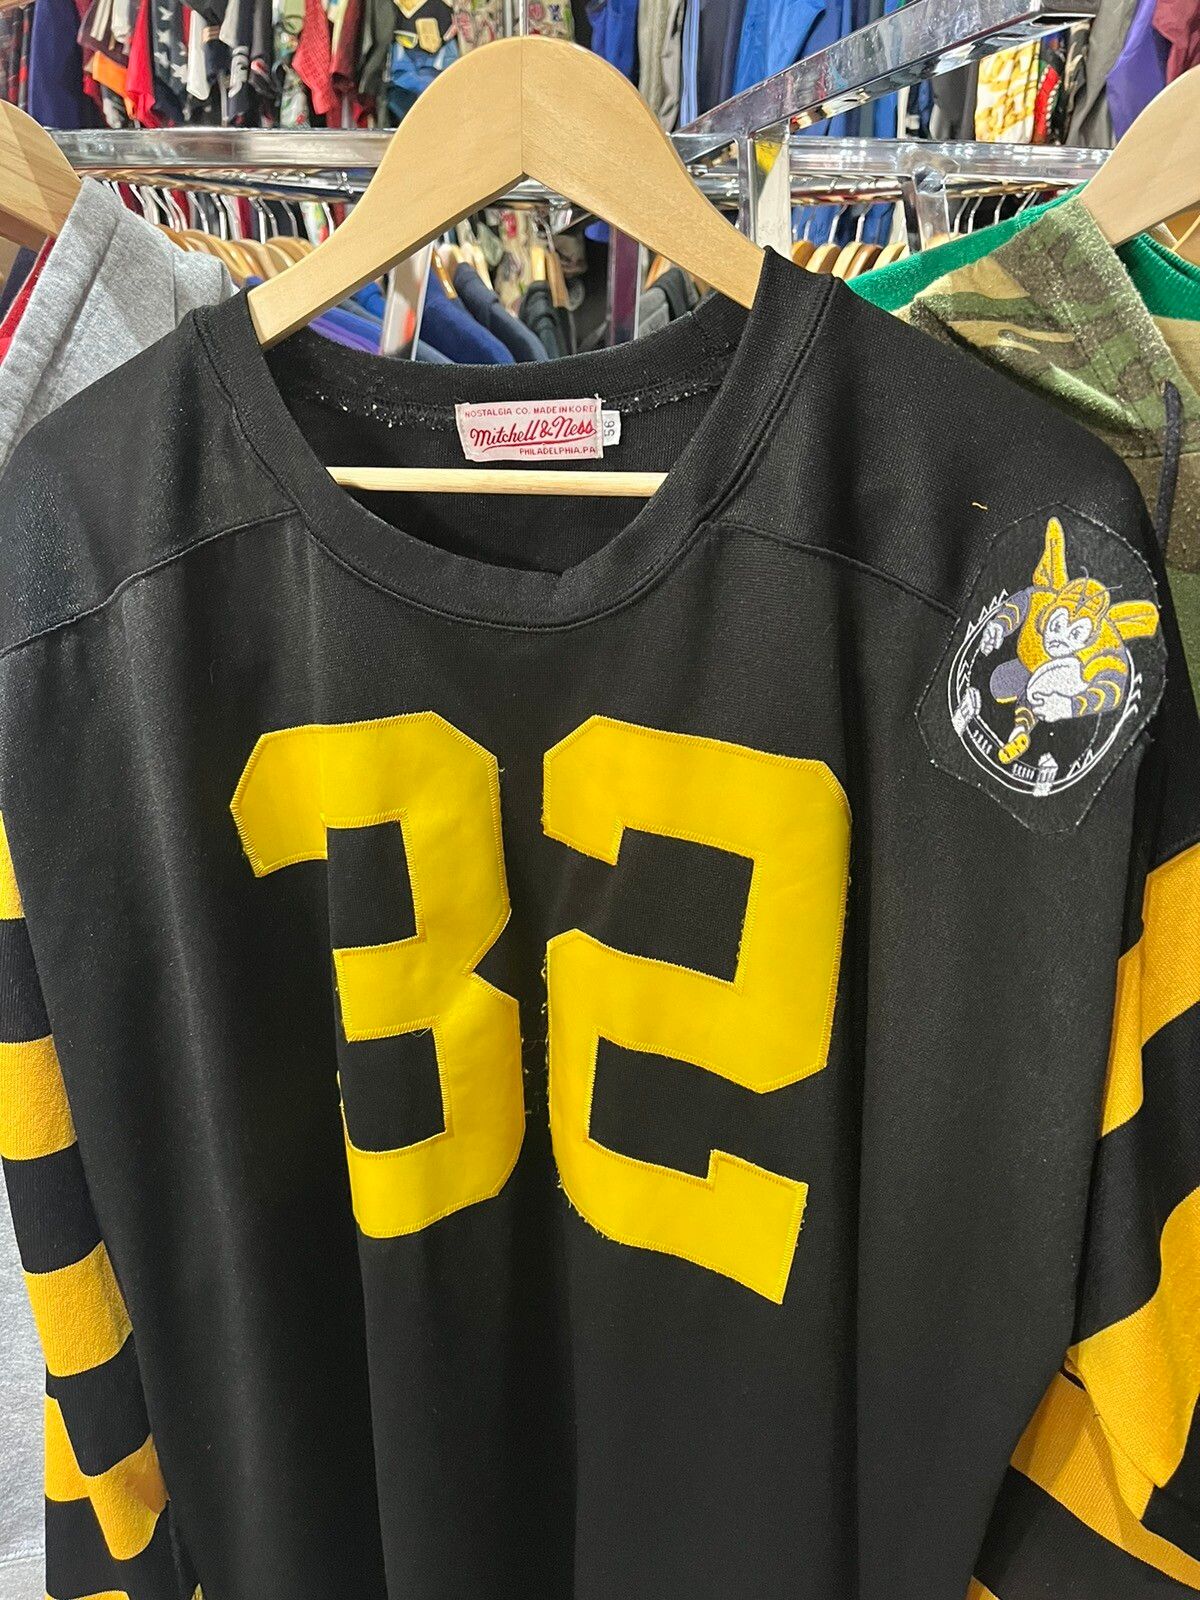 Vintage Mitchell and Ness Vintage Chicago Hornets AFL 1949 Jersey 56 Size US XL / EU 56 / 4 - 2 Preview